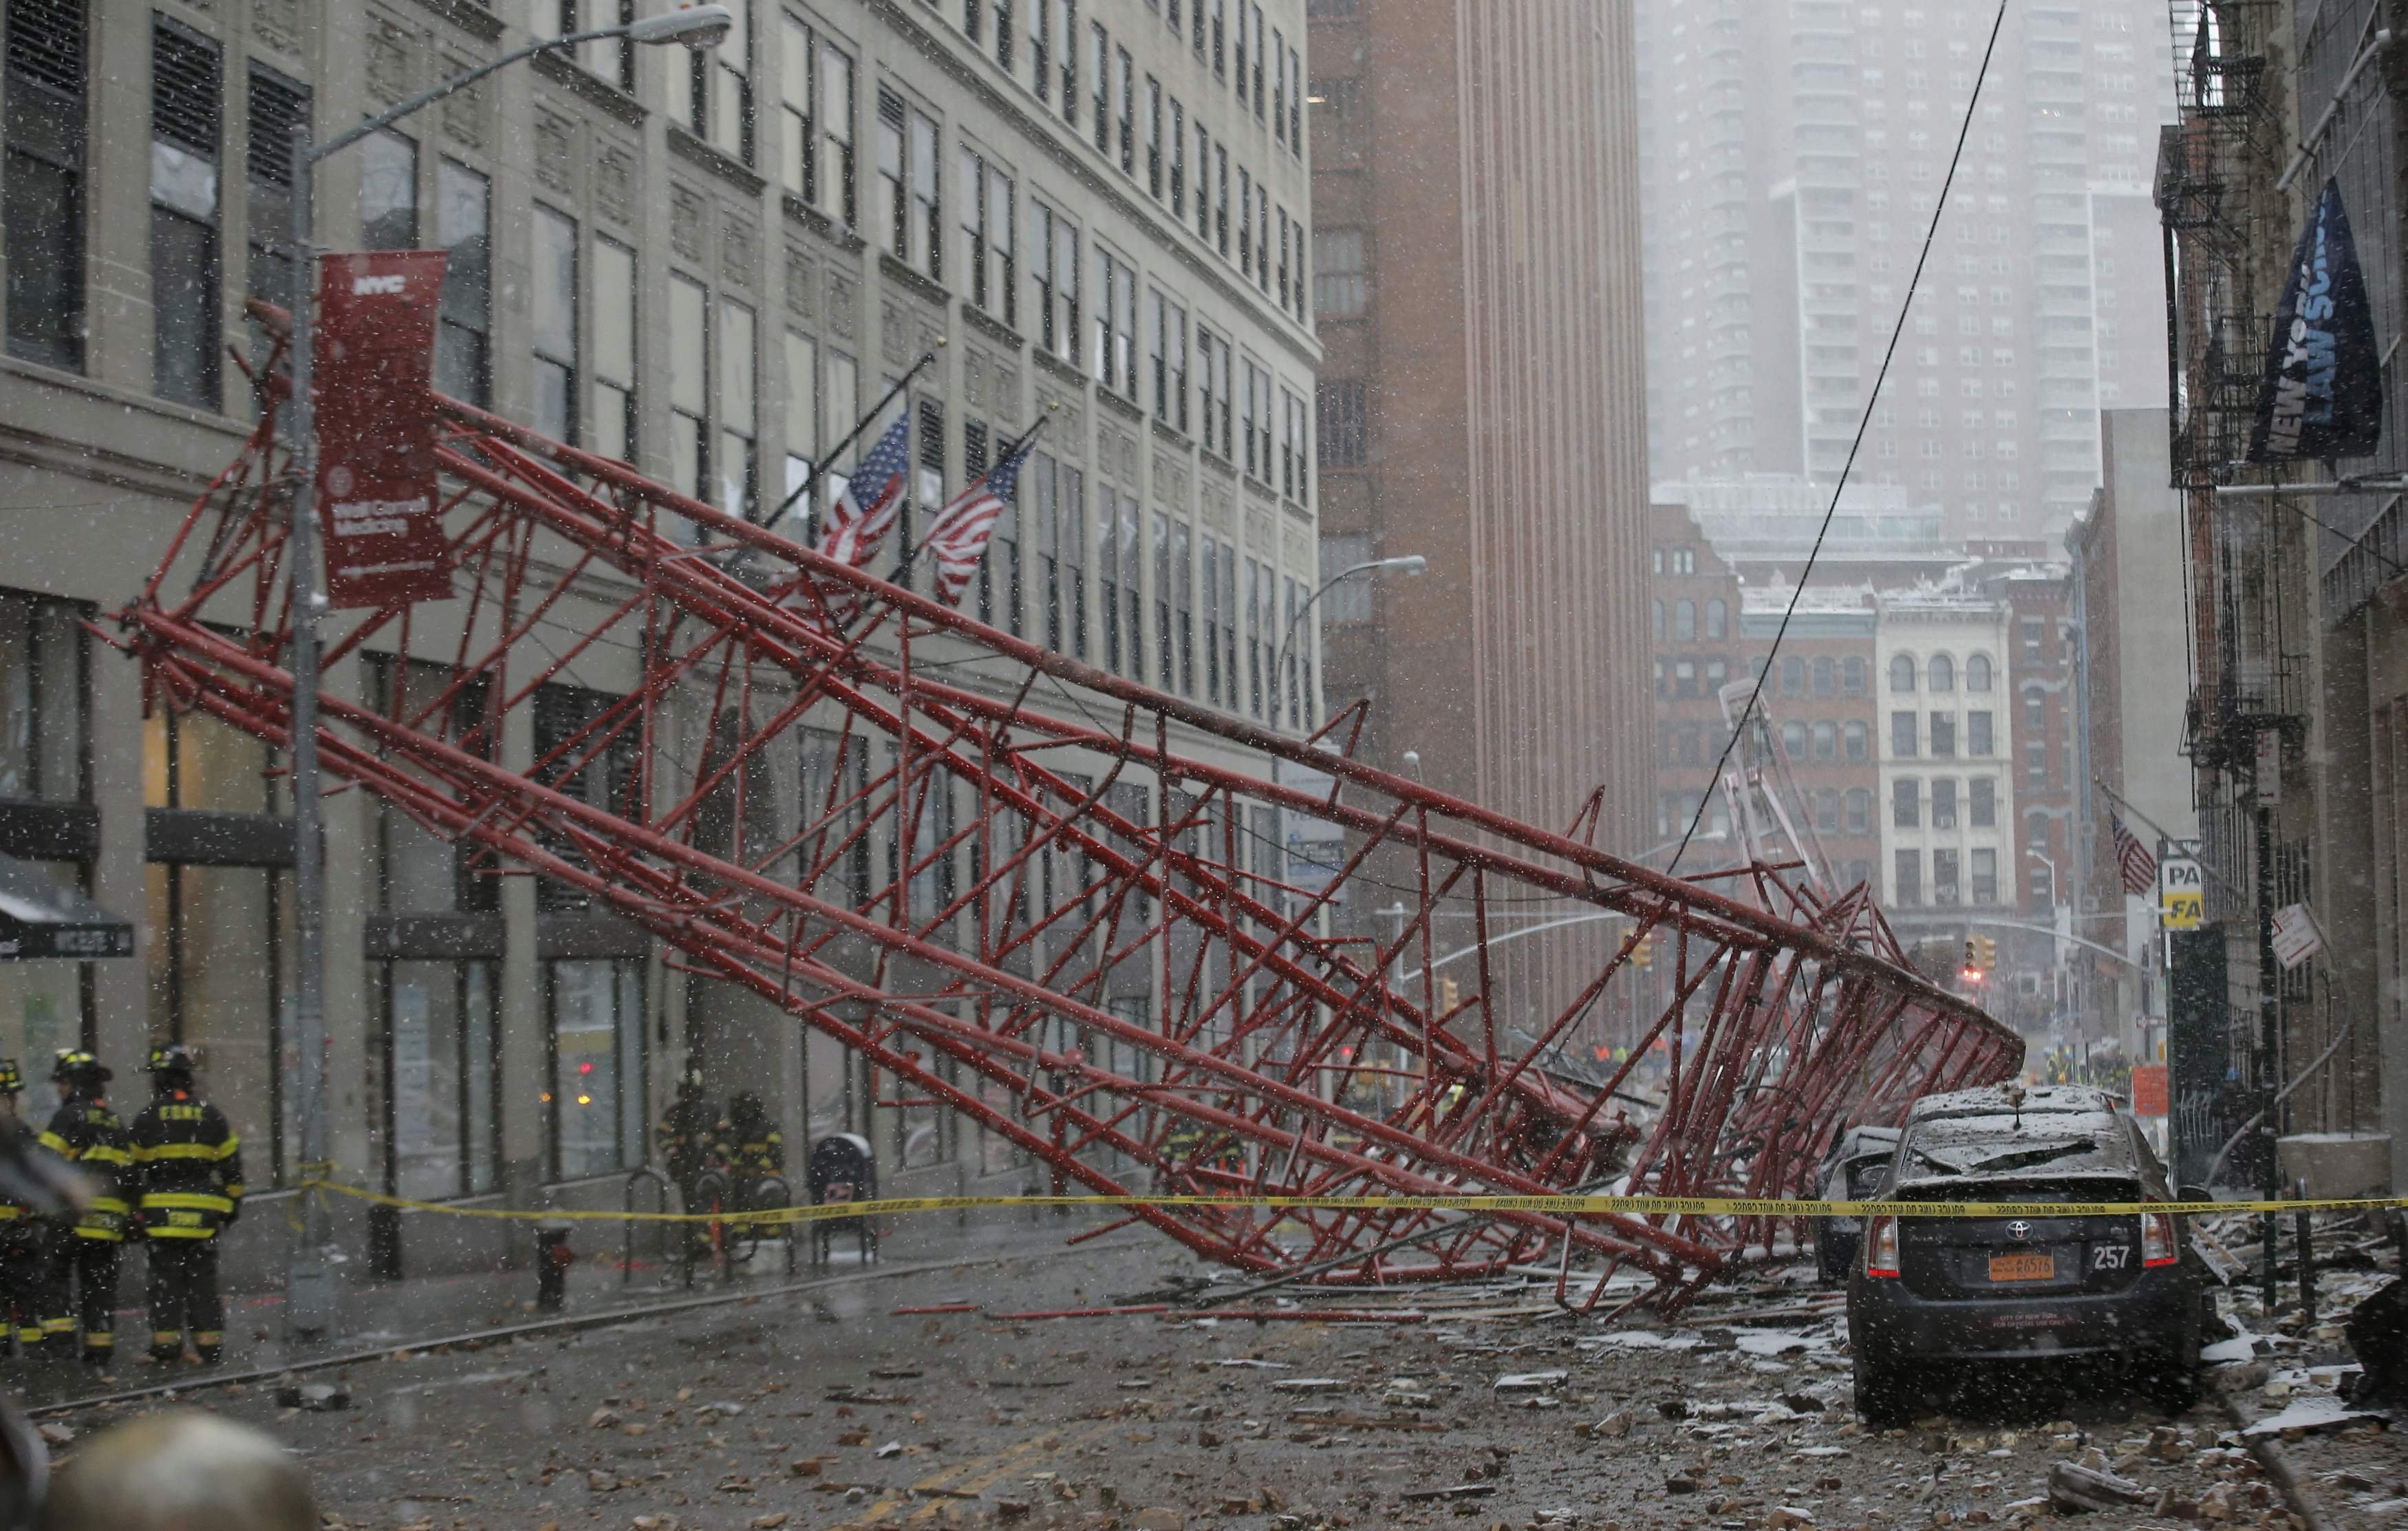 Emergency crews survey a massive construction crane collapse on a street in downtown Manhattan in New York City, on Feb. 5, 2016. (Brendan McDermid—Reuters)